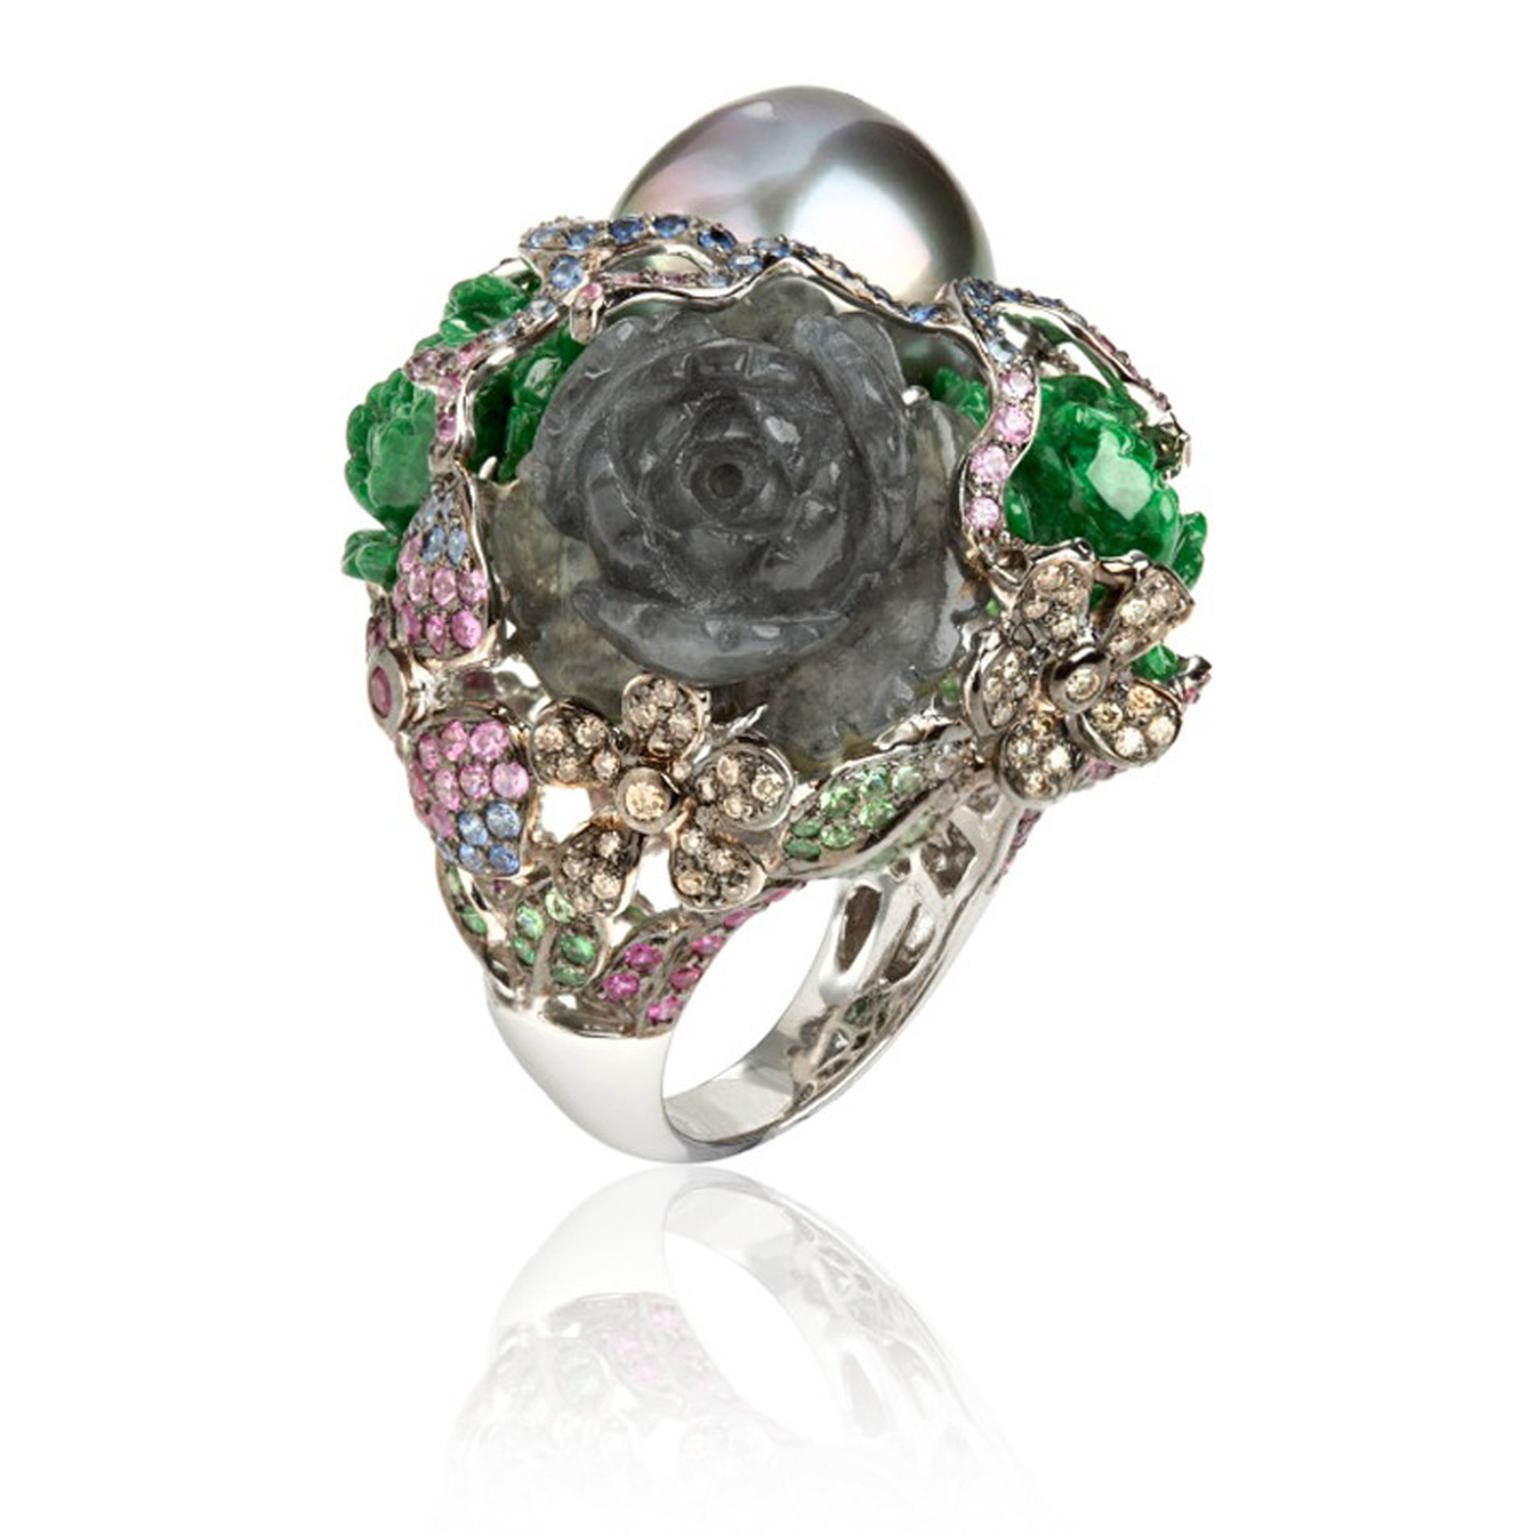 Wendy-Yue-Fantasie-18ct-white-gold-pearl--diamond-sapphires-garnetjade-and-tourmaline-Perilous-Pearl-ring-By-Wendy--Yue-for-Annoushka.jpg